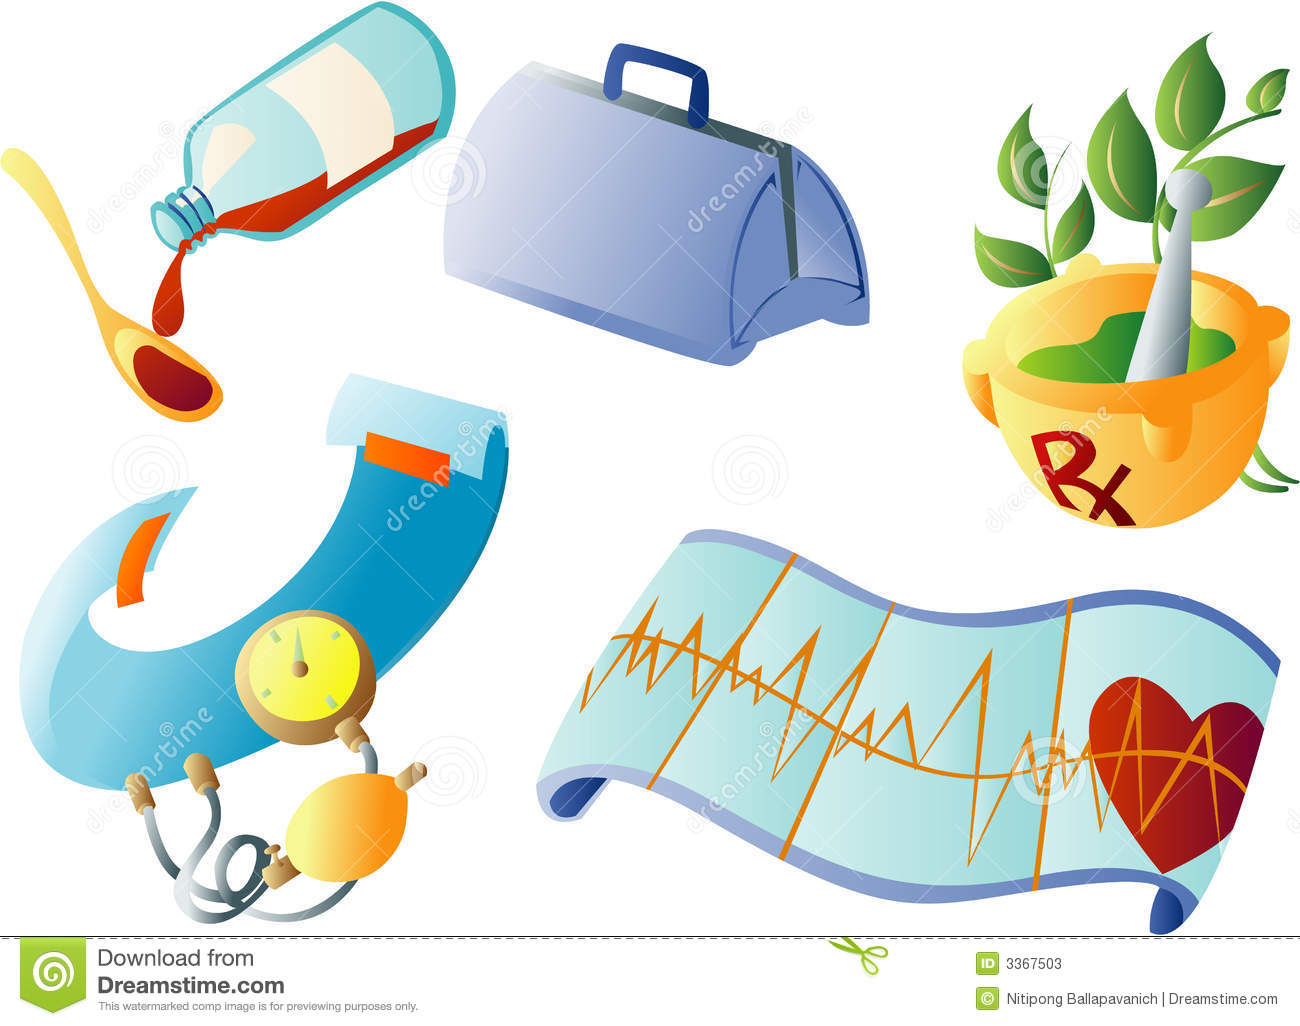 Medical Clipart stock vector. Illustration of clinical.